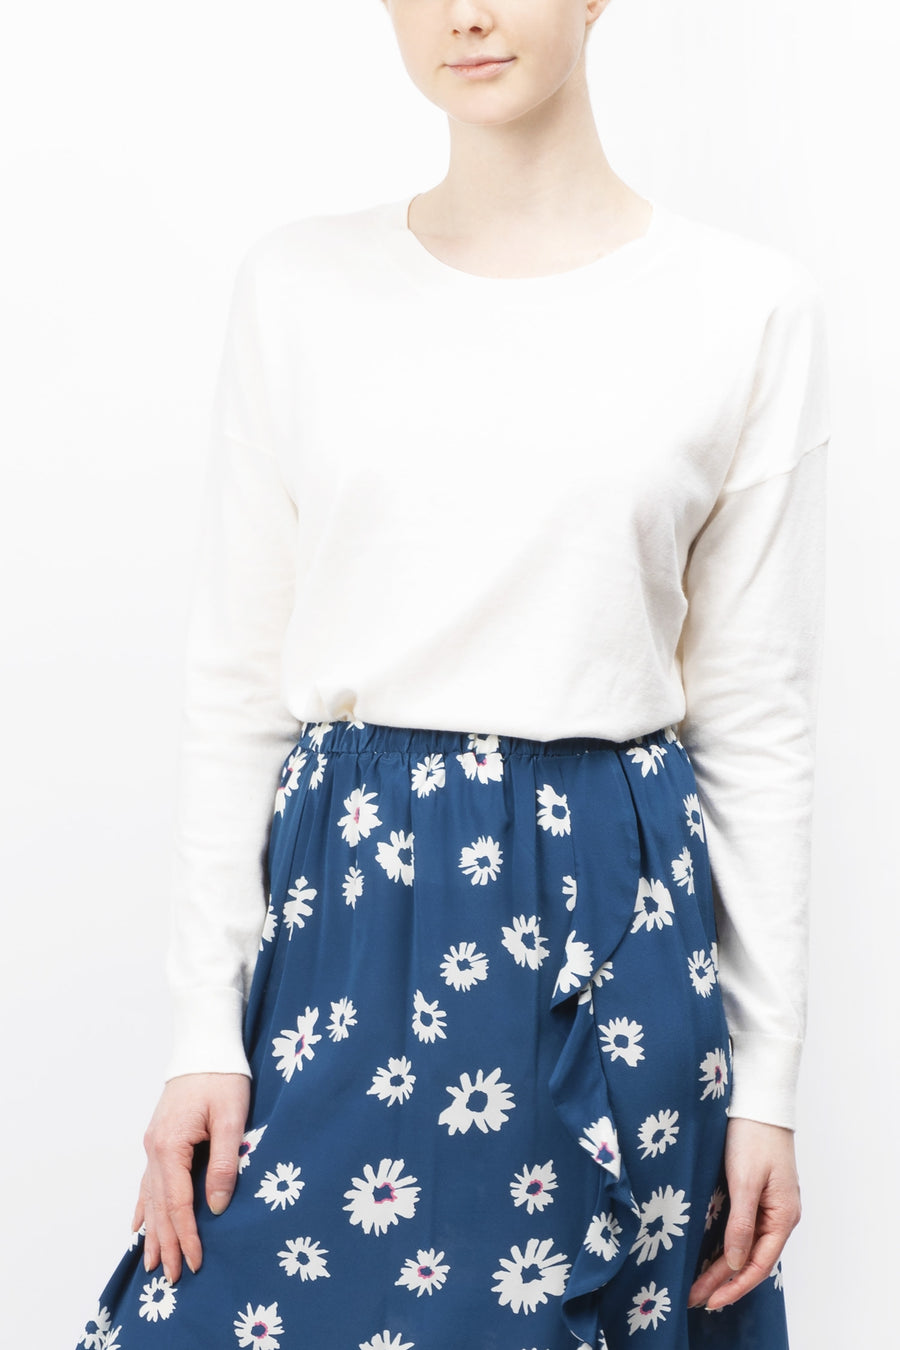 Berenice skirts, sweaters and clothings for women online